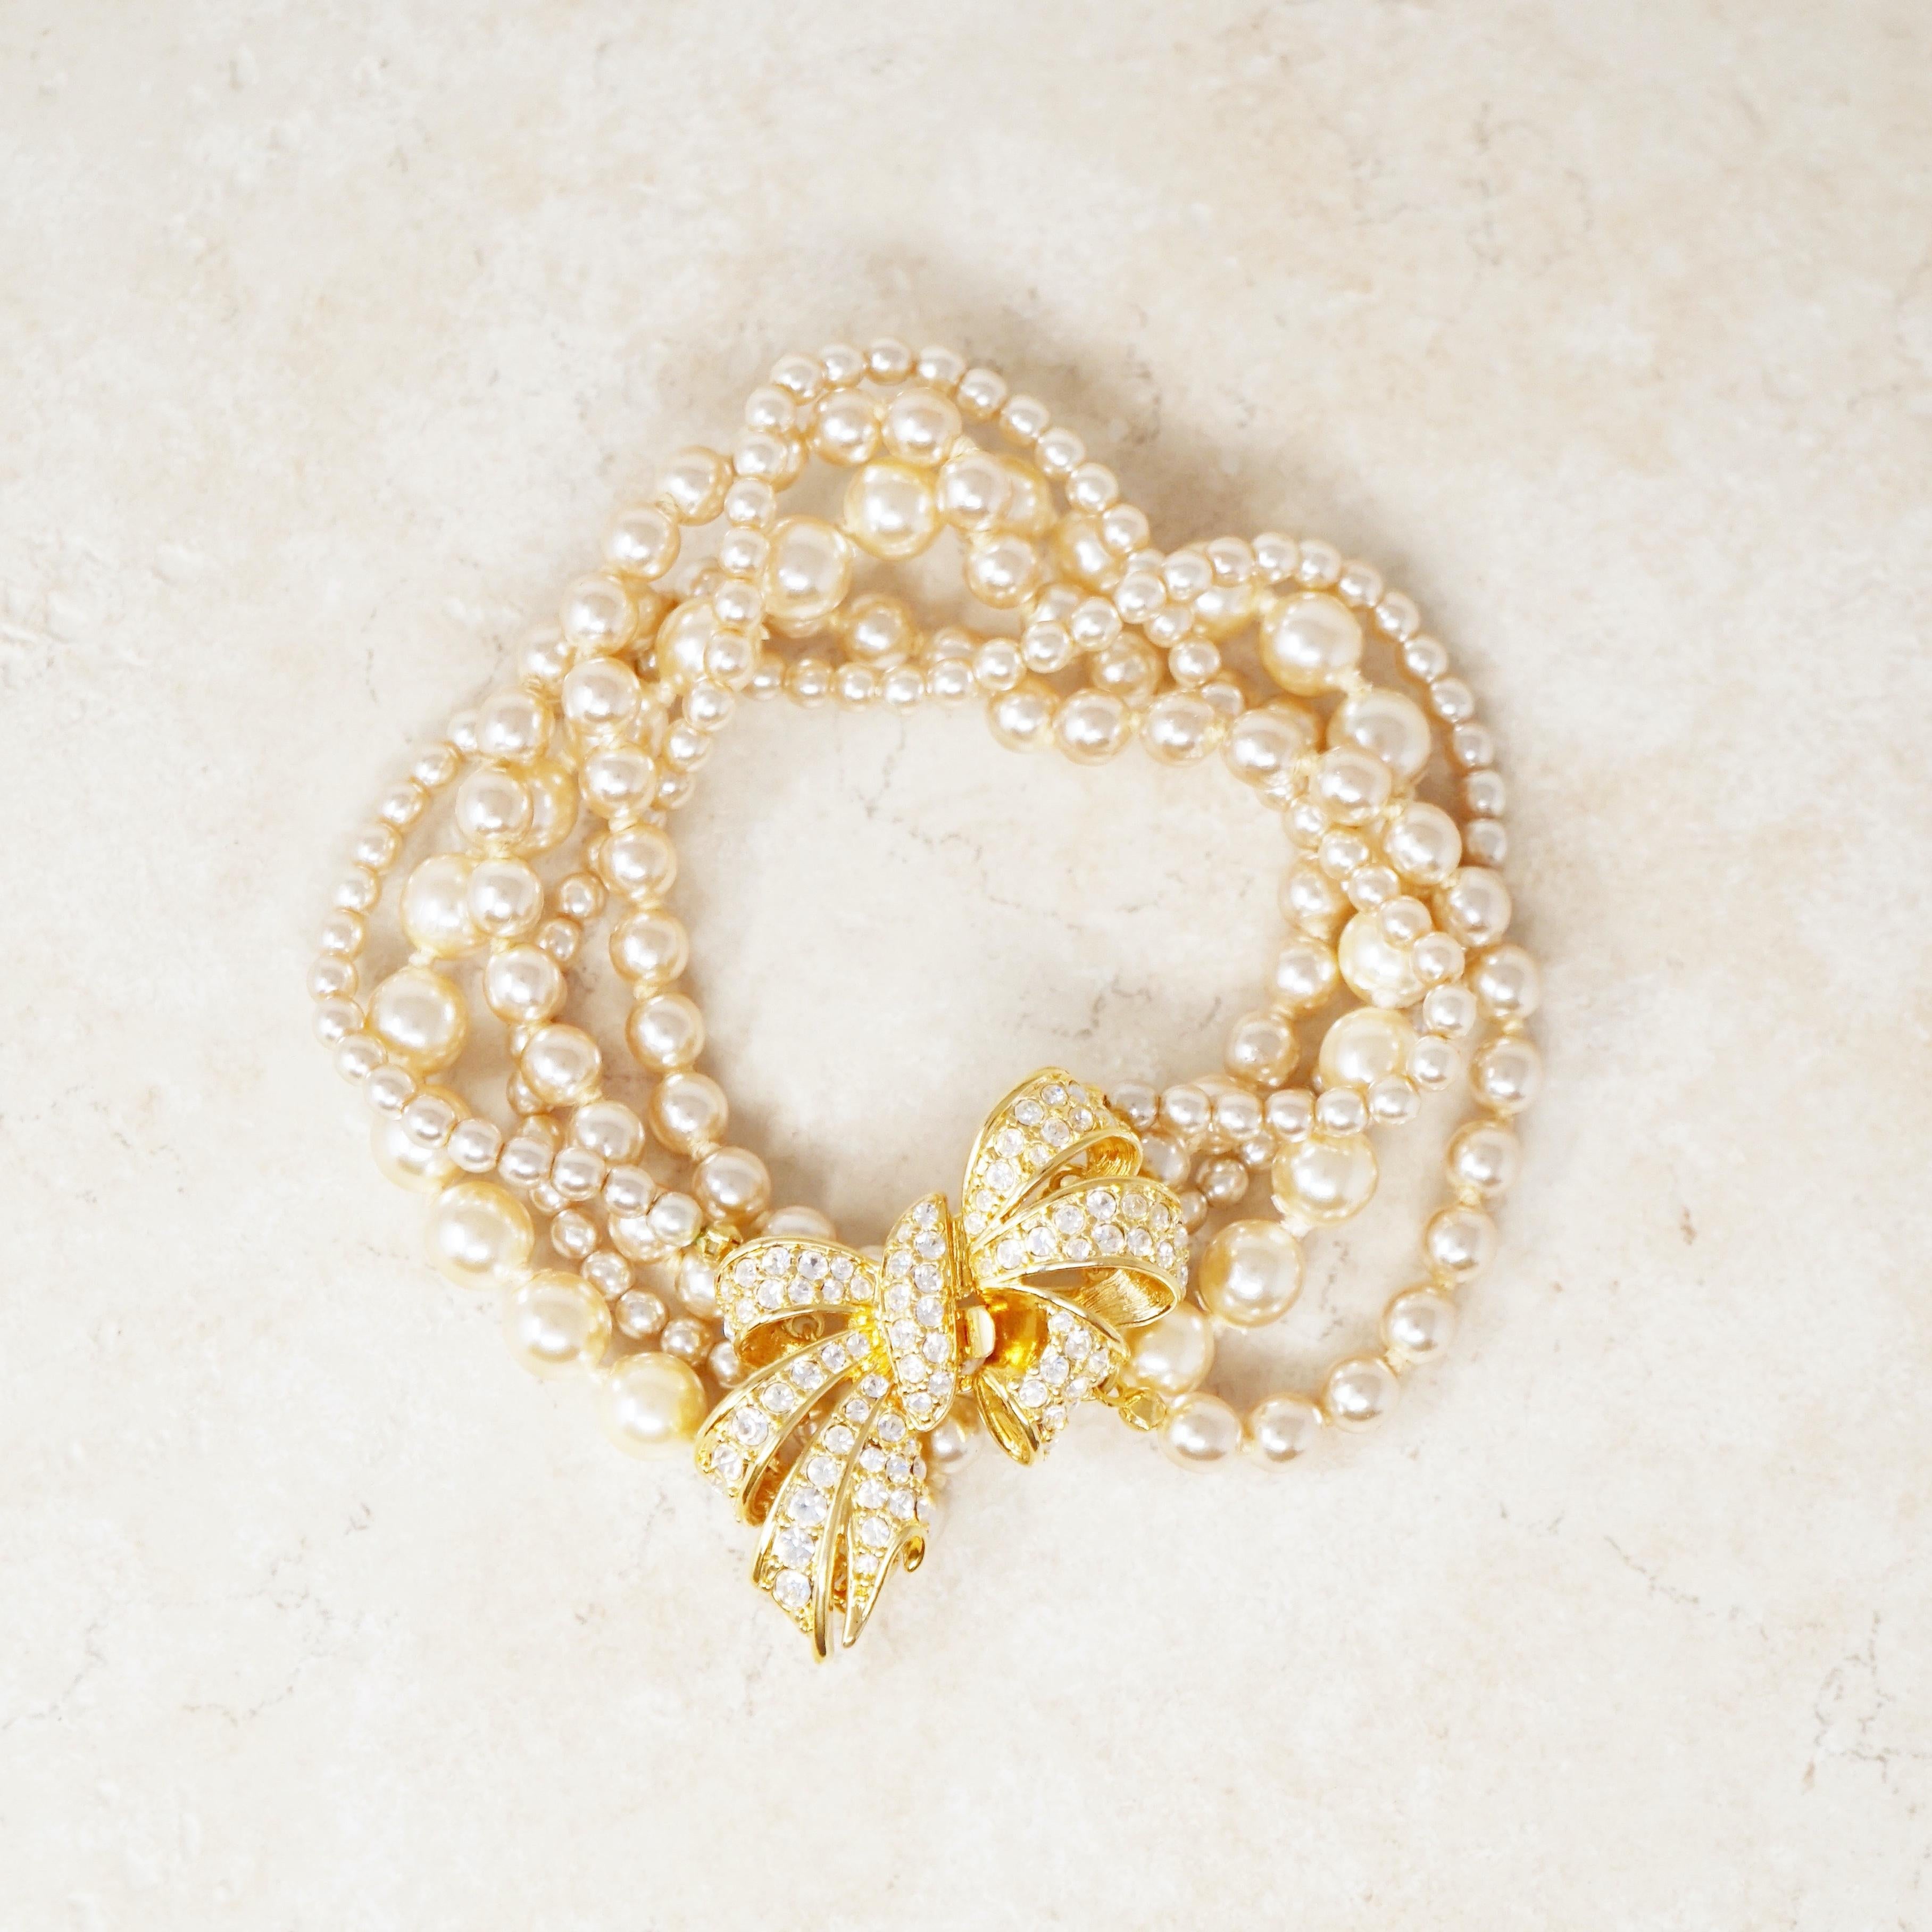 Women's Five Strand Pearl Bracelet with Crystal Pavé Bow Clasp by Nolan Miller, 1980s